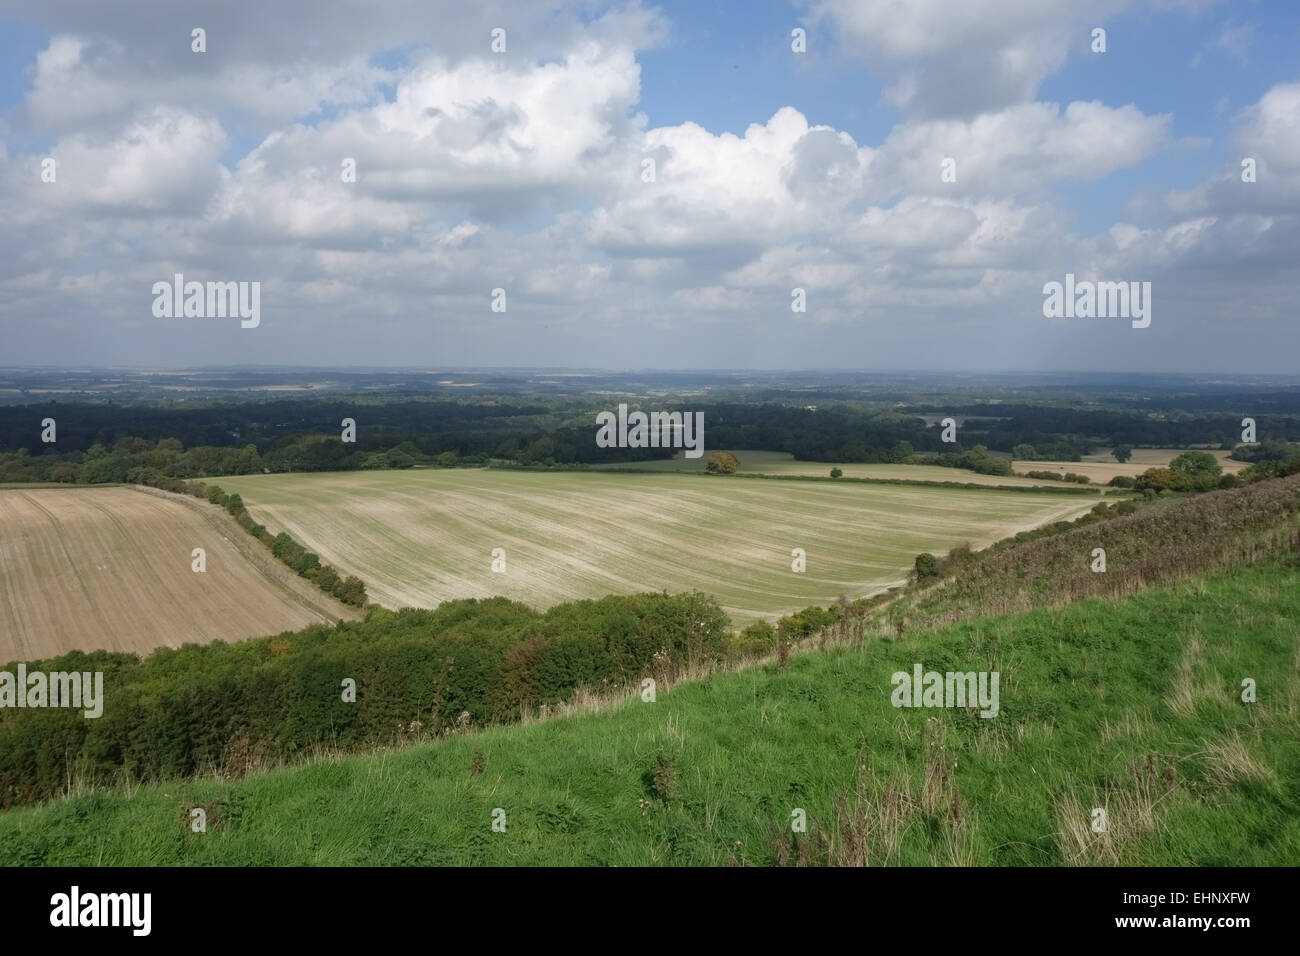 Cereal farmland with a stubble field and a young cereal crop emerging on a  bright autumn day in West Berkshire, September Stock Photo